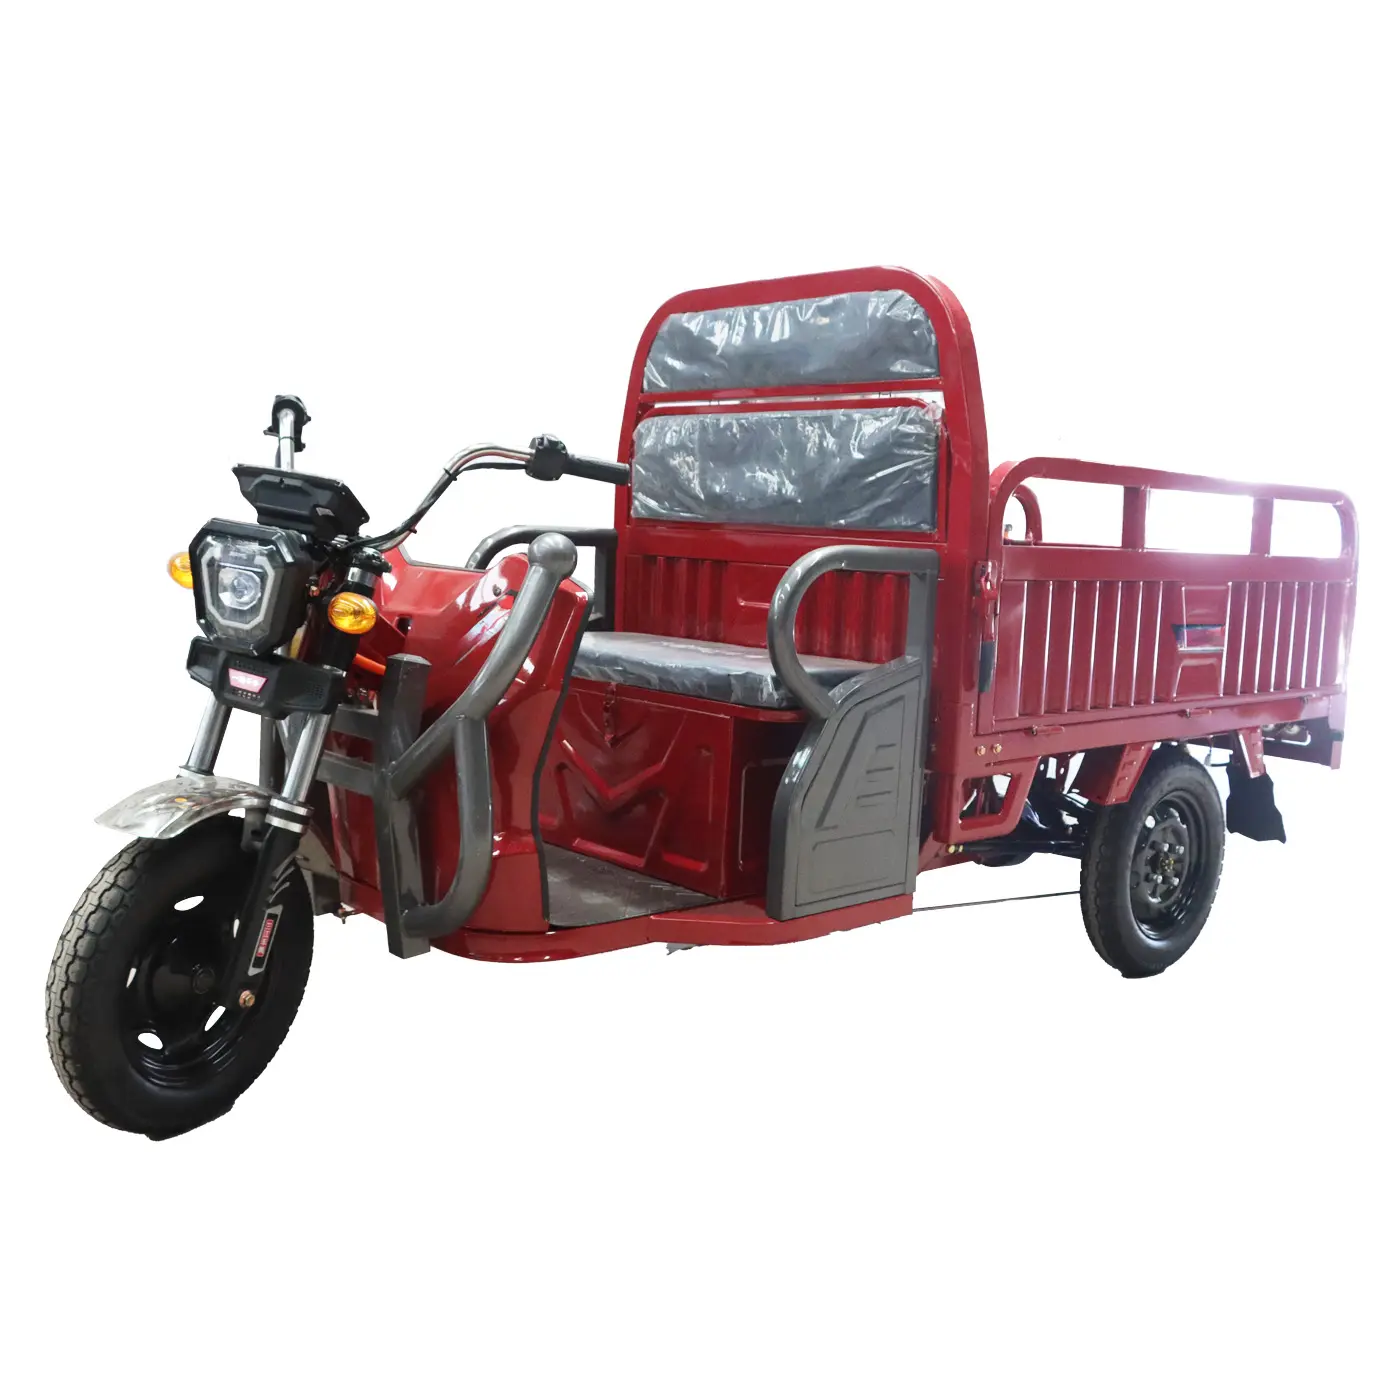 Hot 60V open high-quality large cargo basket electric freight tricycle, easy to operate, suitable for the elderly